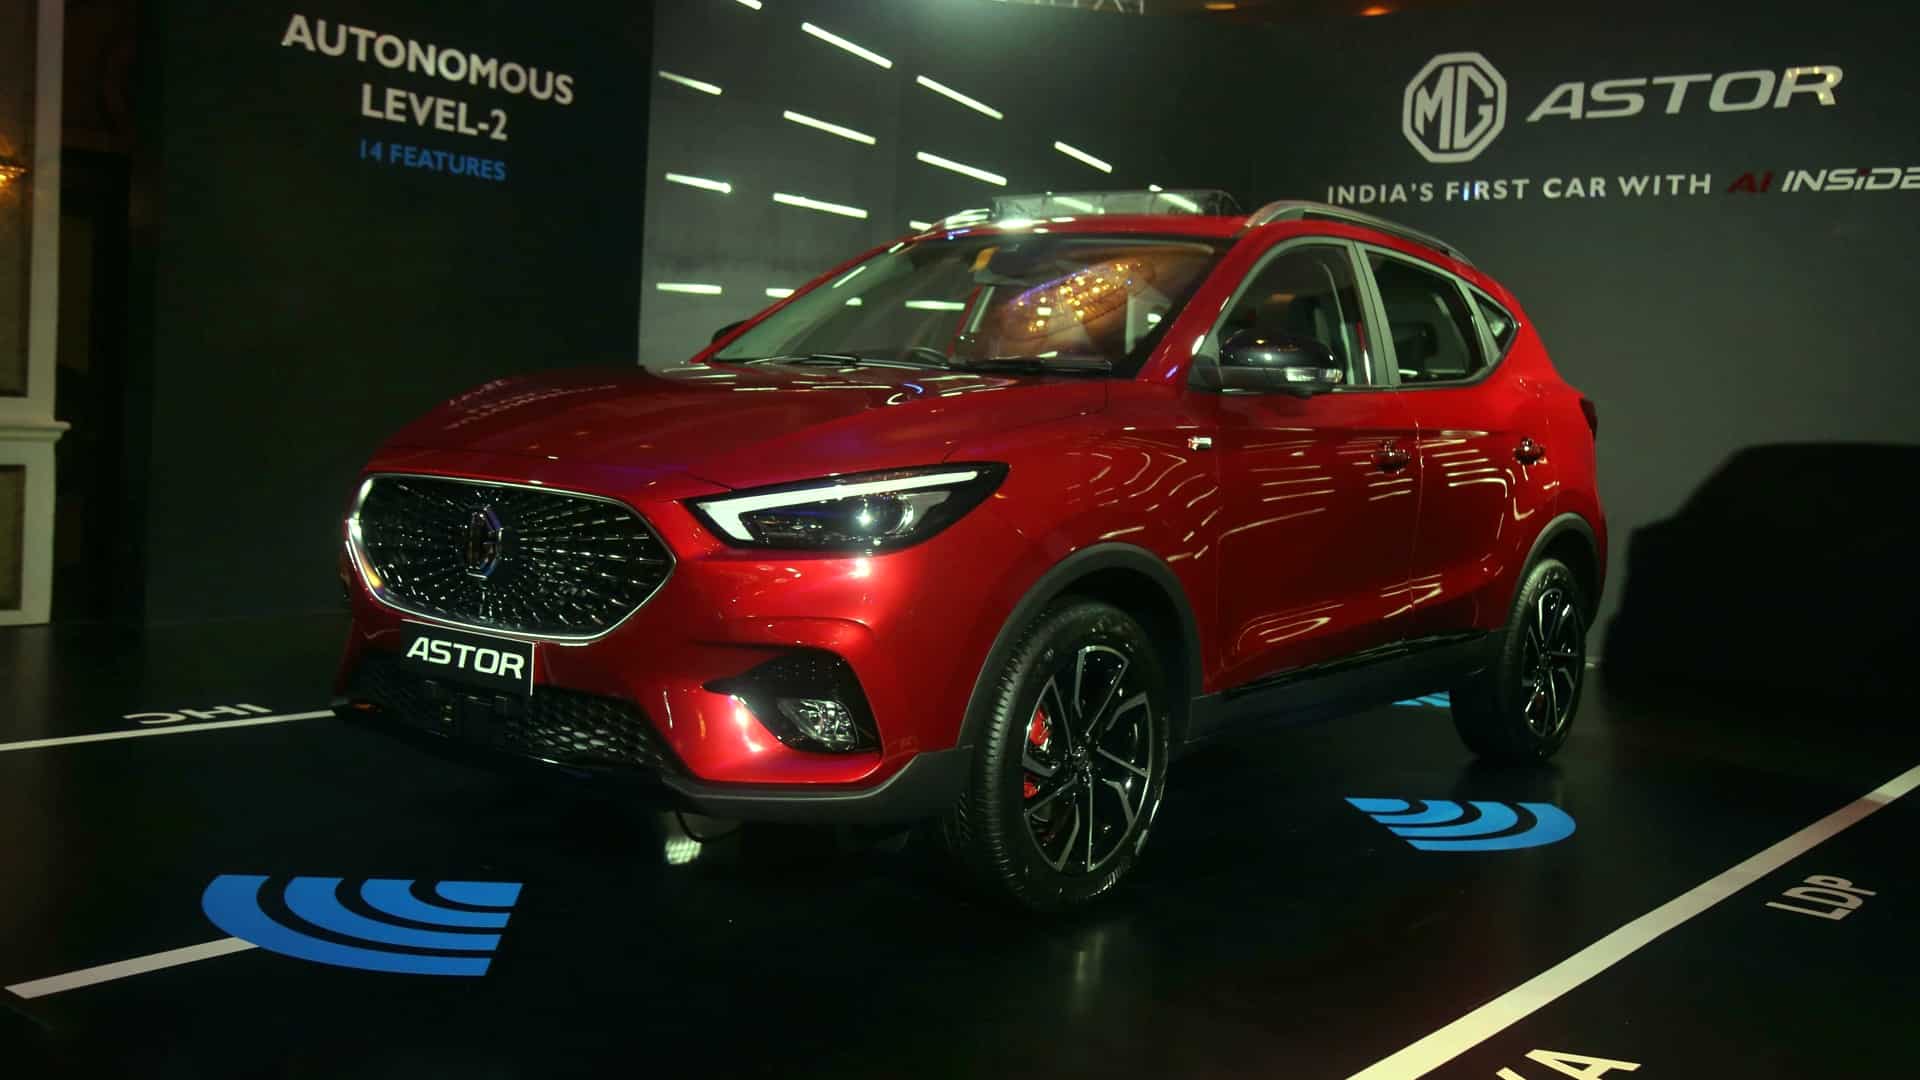 MG Motor drives in Astor at Rs 9.78 lakh to foray into mid-size SUV segment